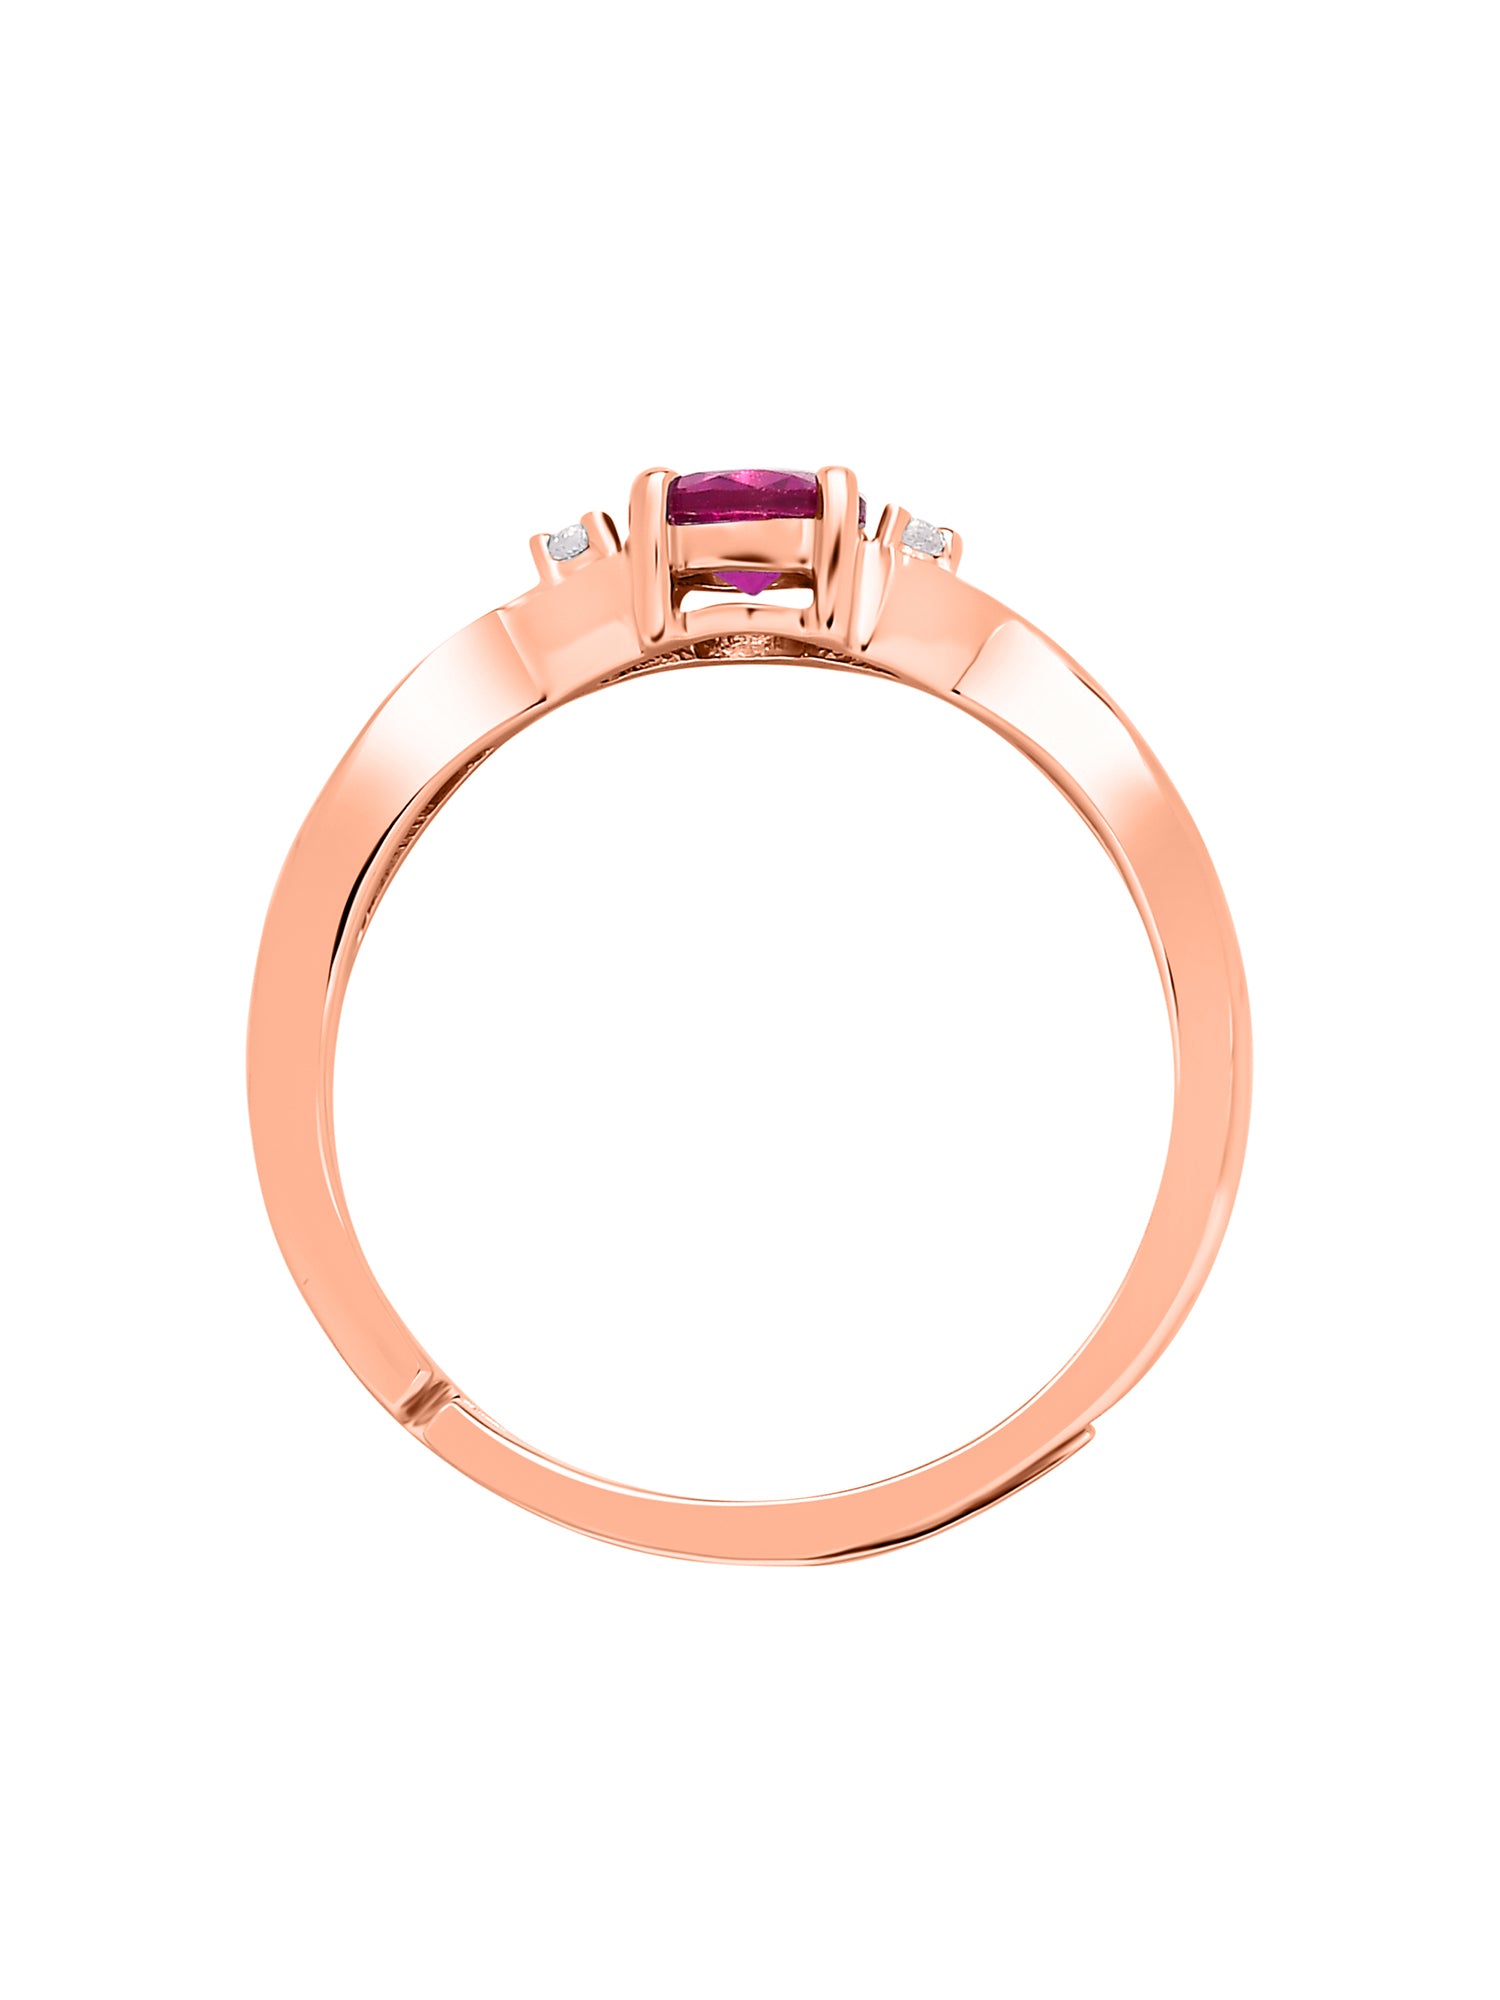 Rose Gold Red Ruby Criss Cross Solitaire Adjustable Ring